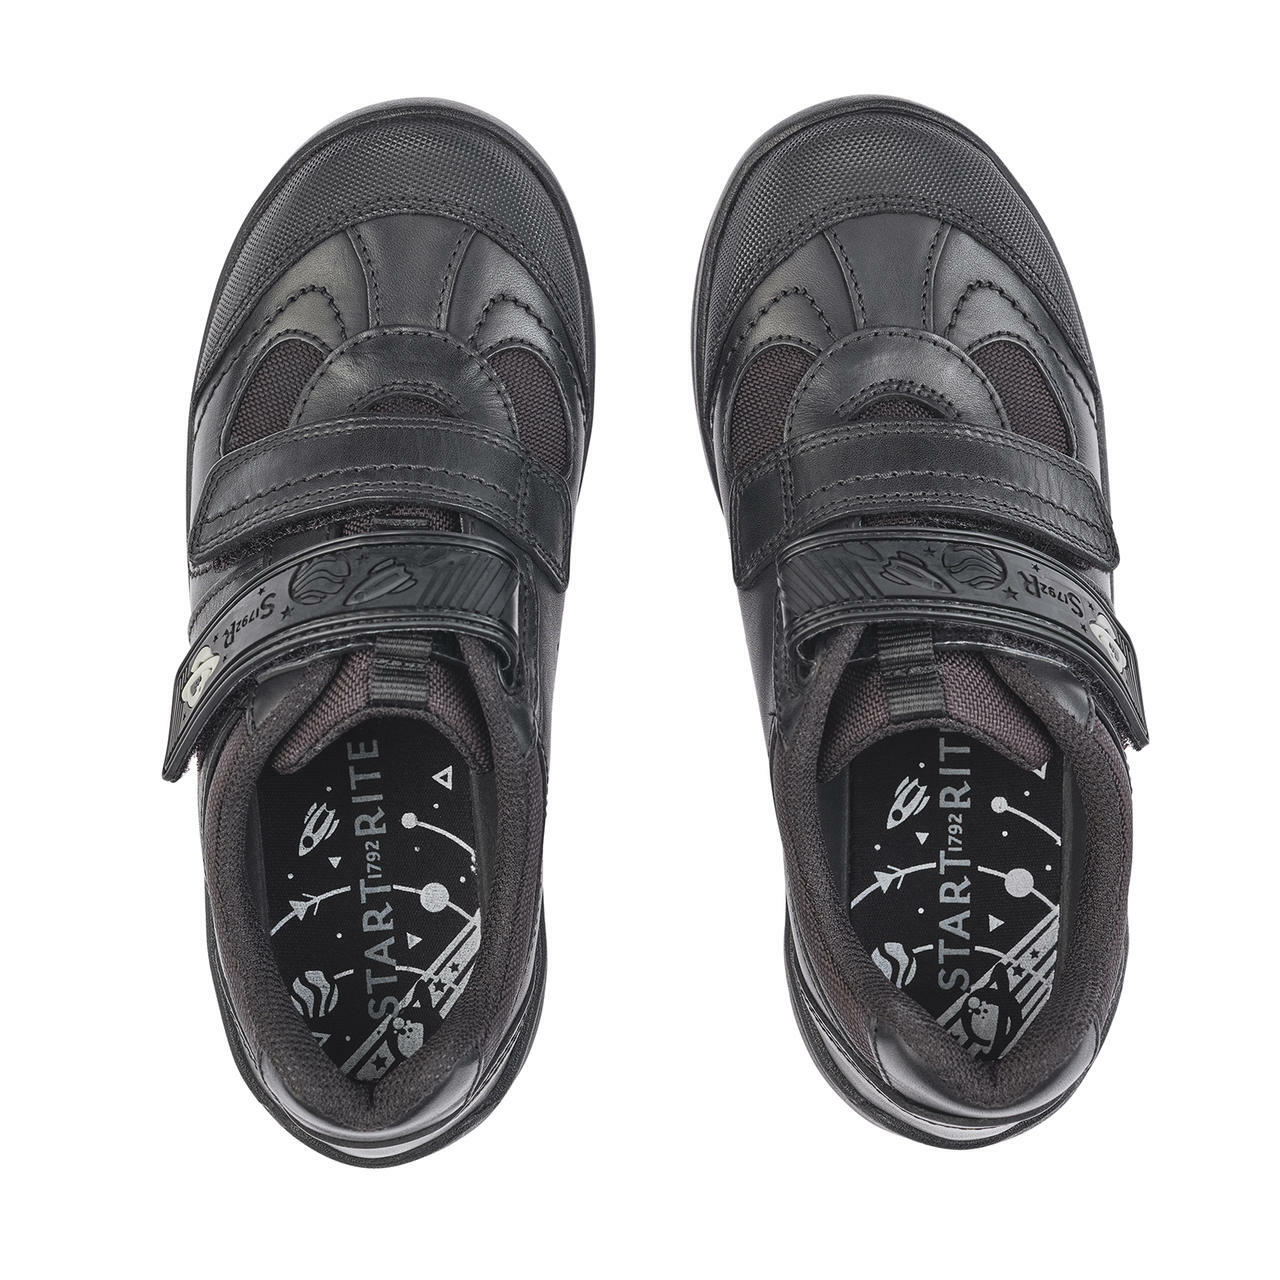 A pair of boys school shoes by Start Rite,style Rocket, in black leather with double velcro fastening. Top view.